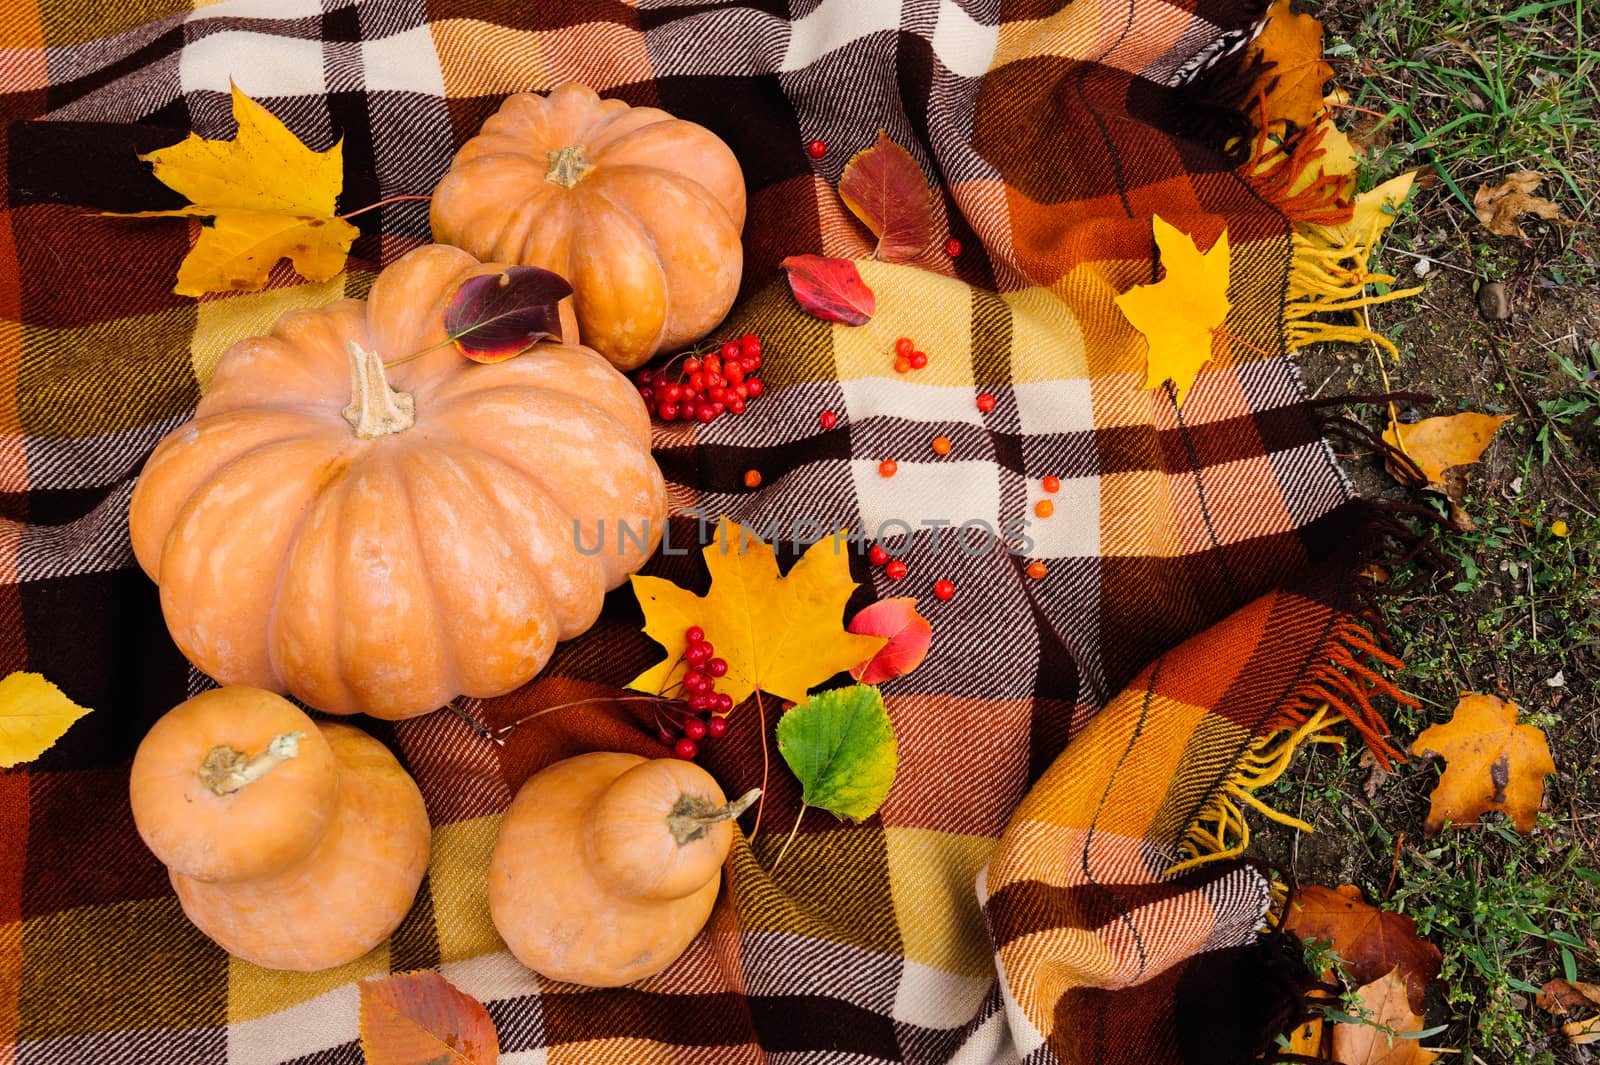 Romantic autumn still life with blanket, pumpkins and leaves, top view